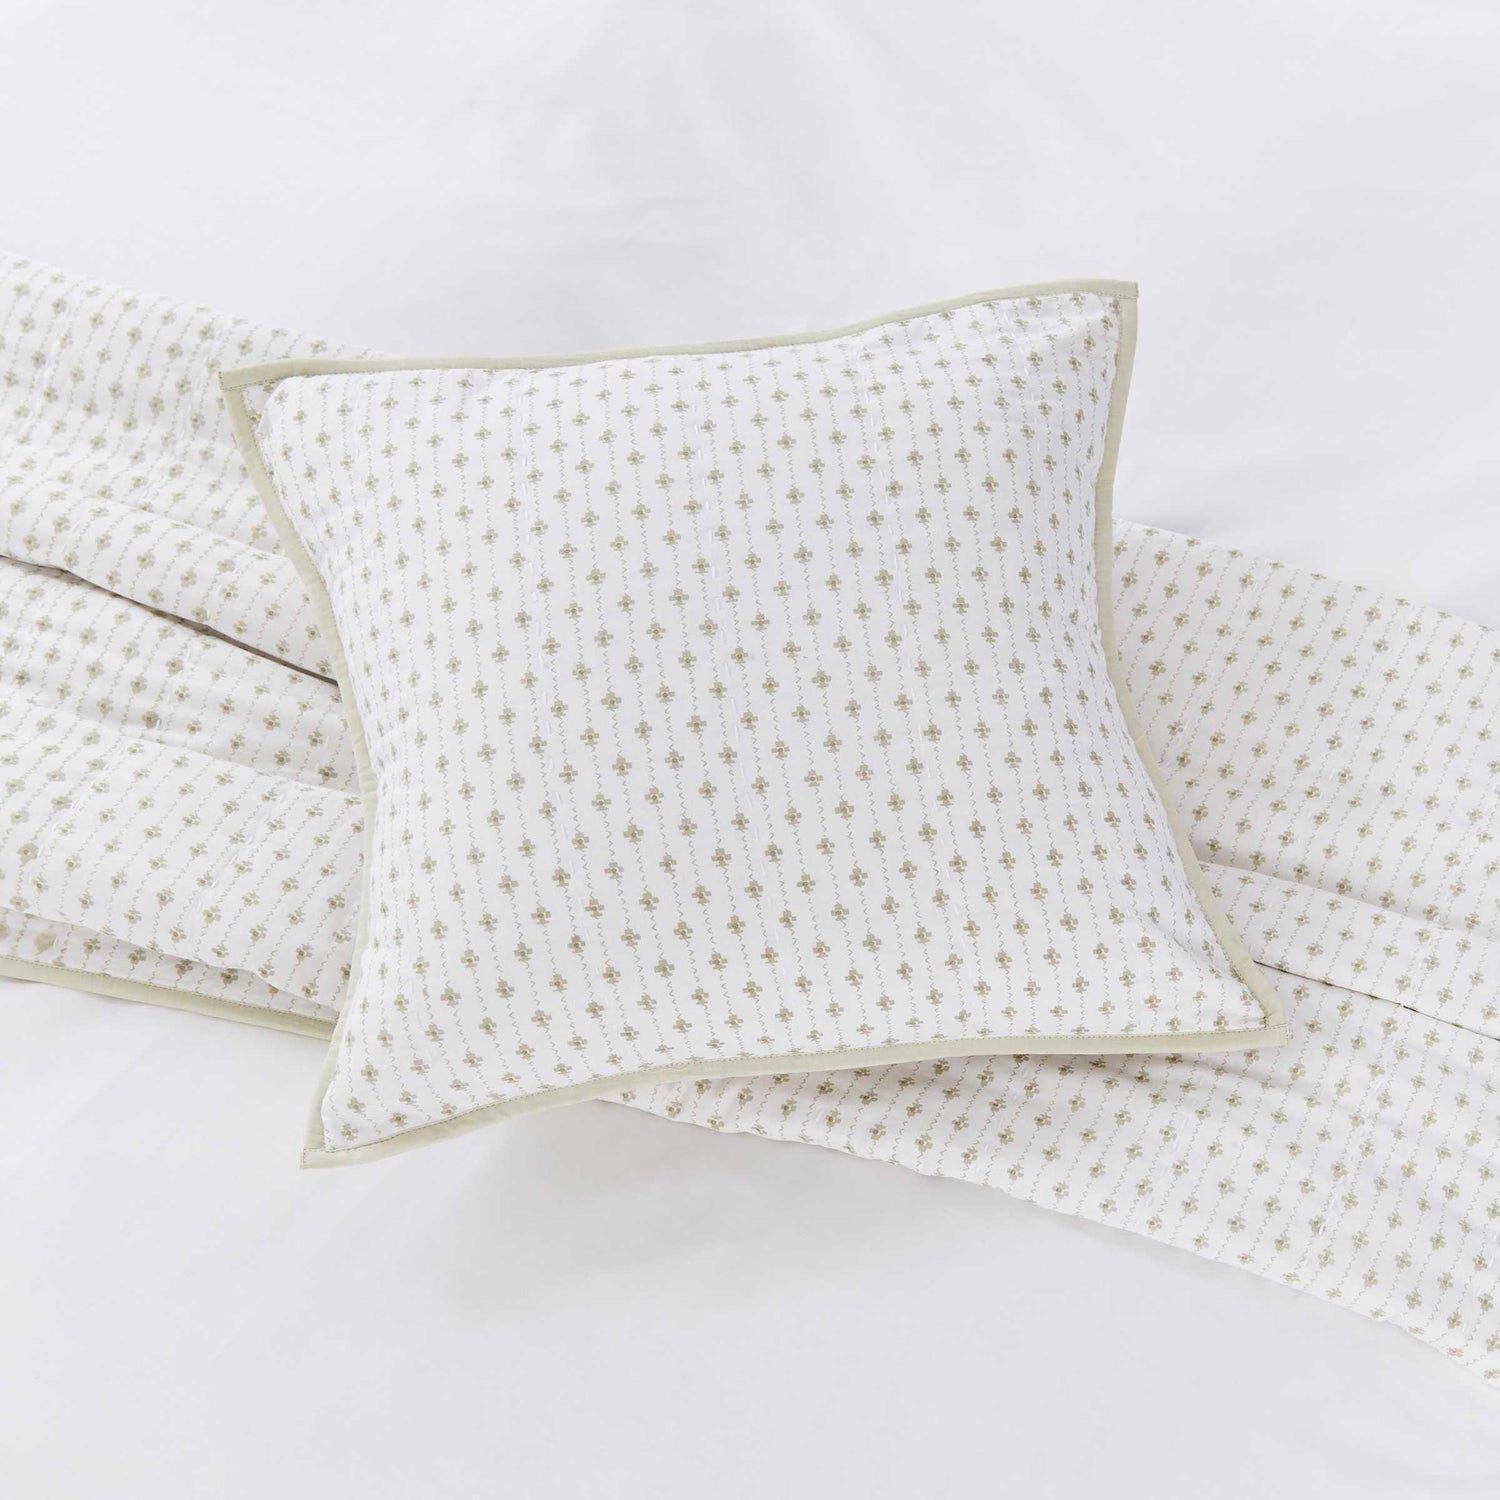 White and Green Patterned Murmur Bedding Accessories 